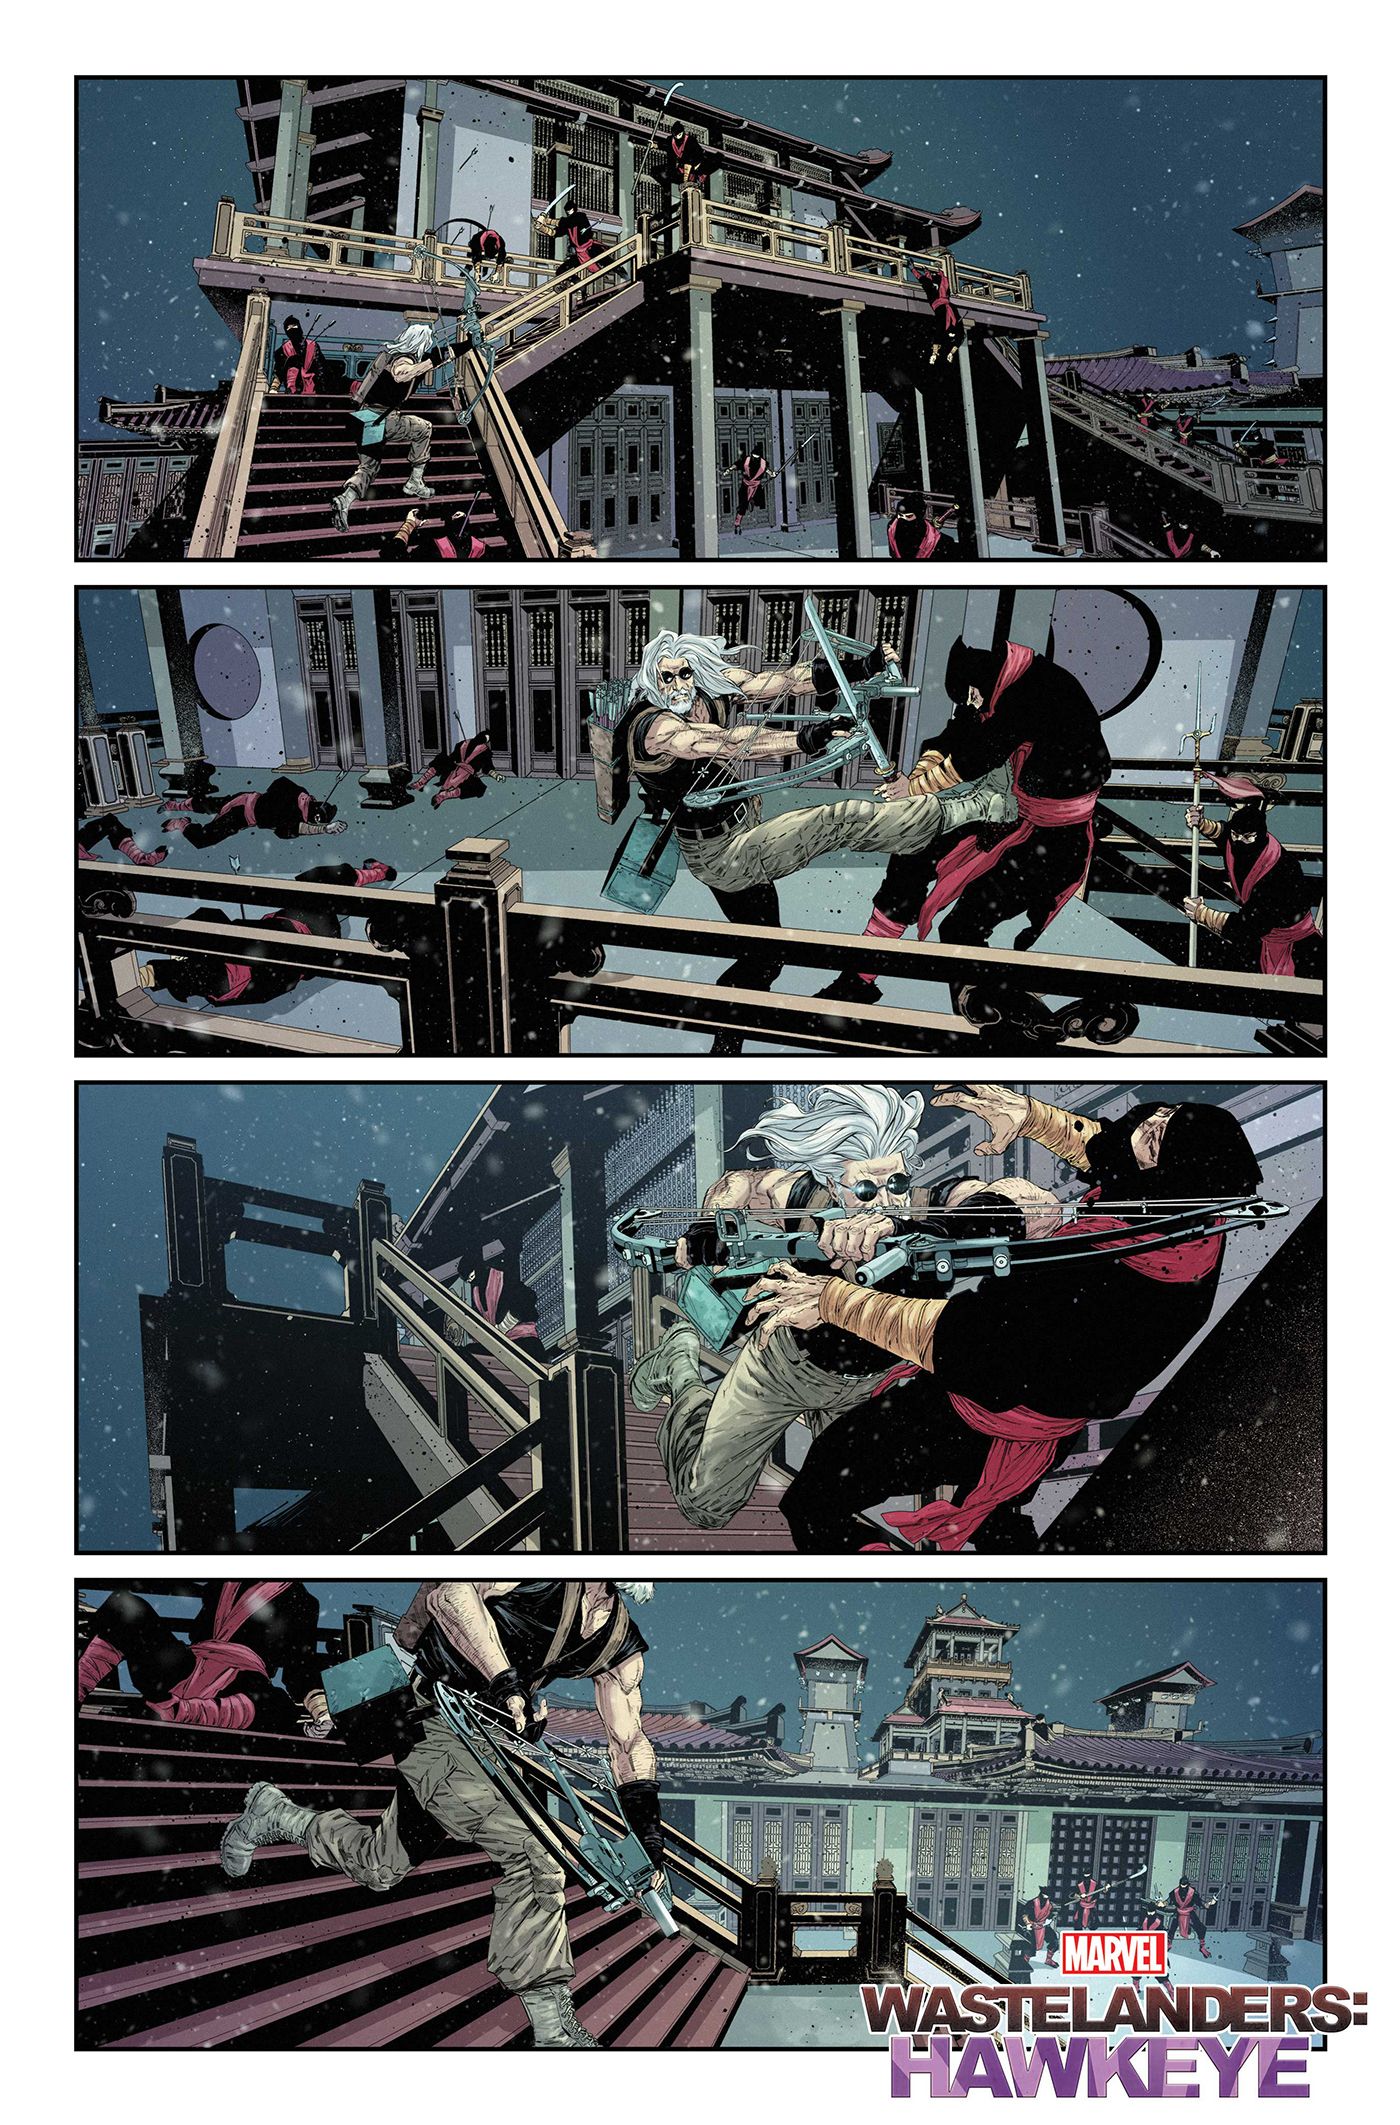 Hawkeye fights ninjas while infiltrating the temple.